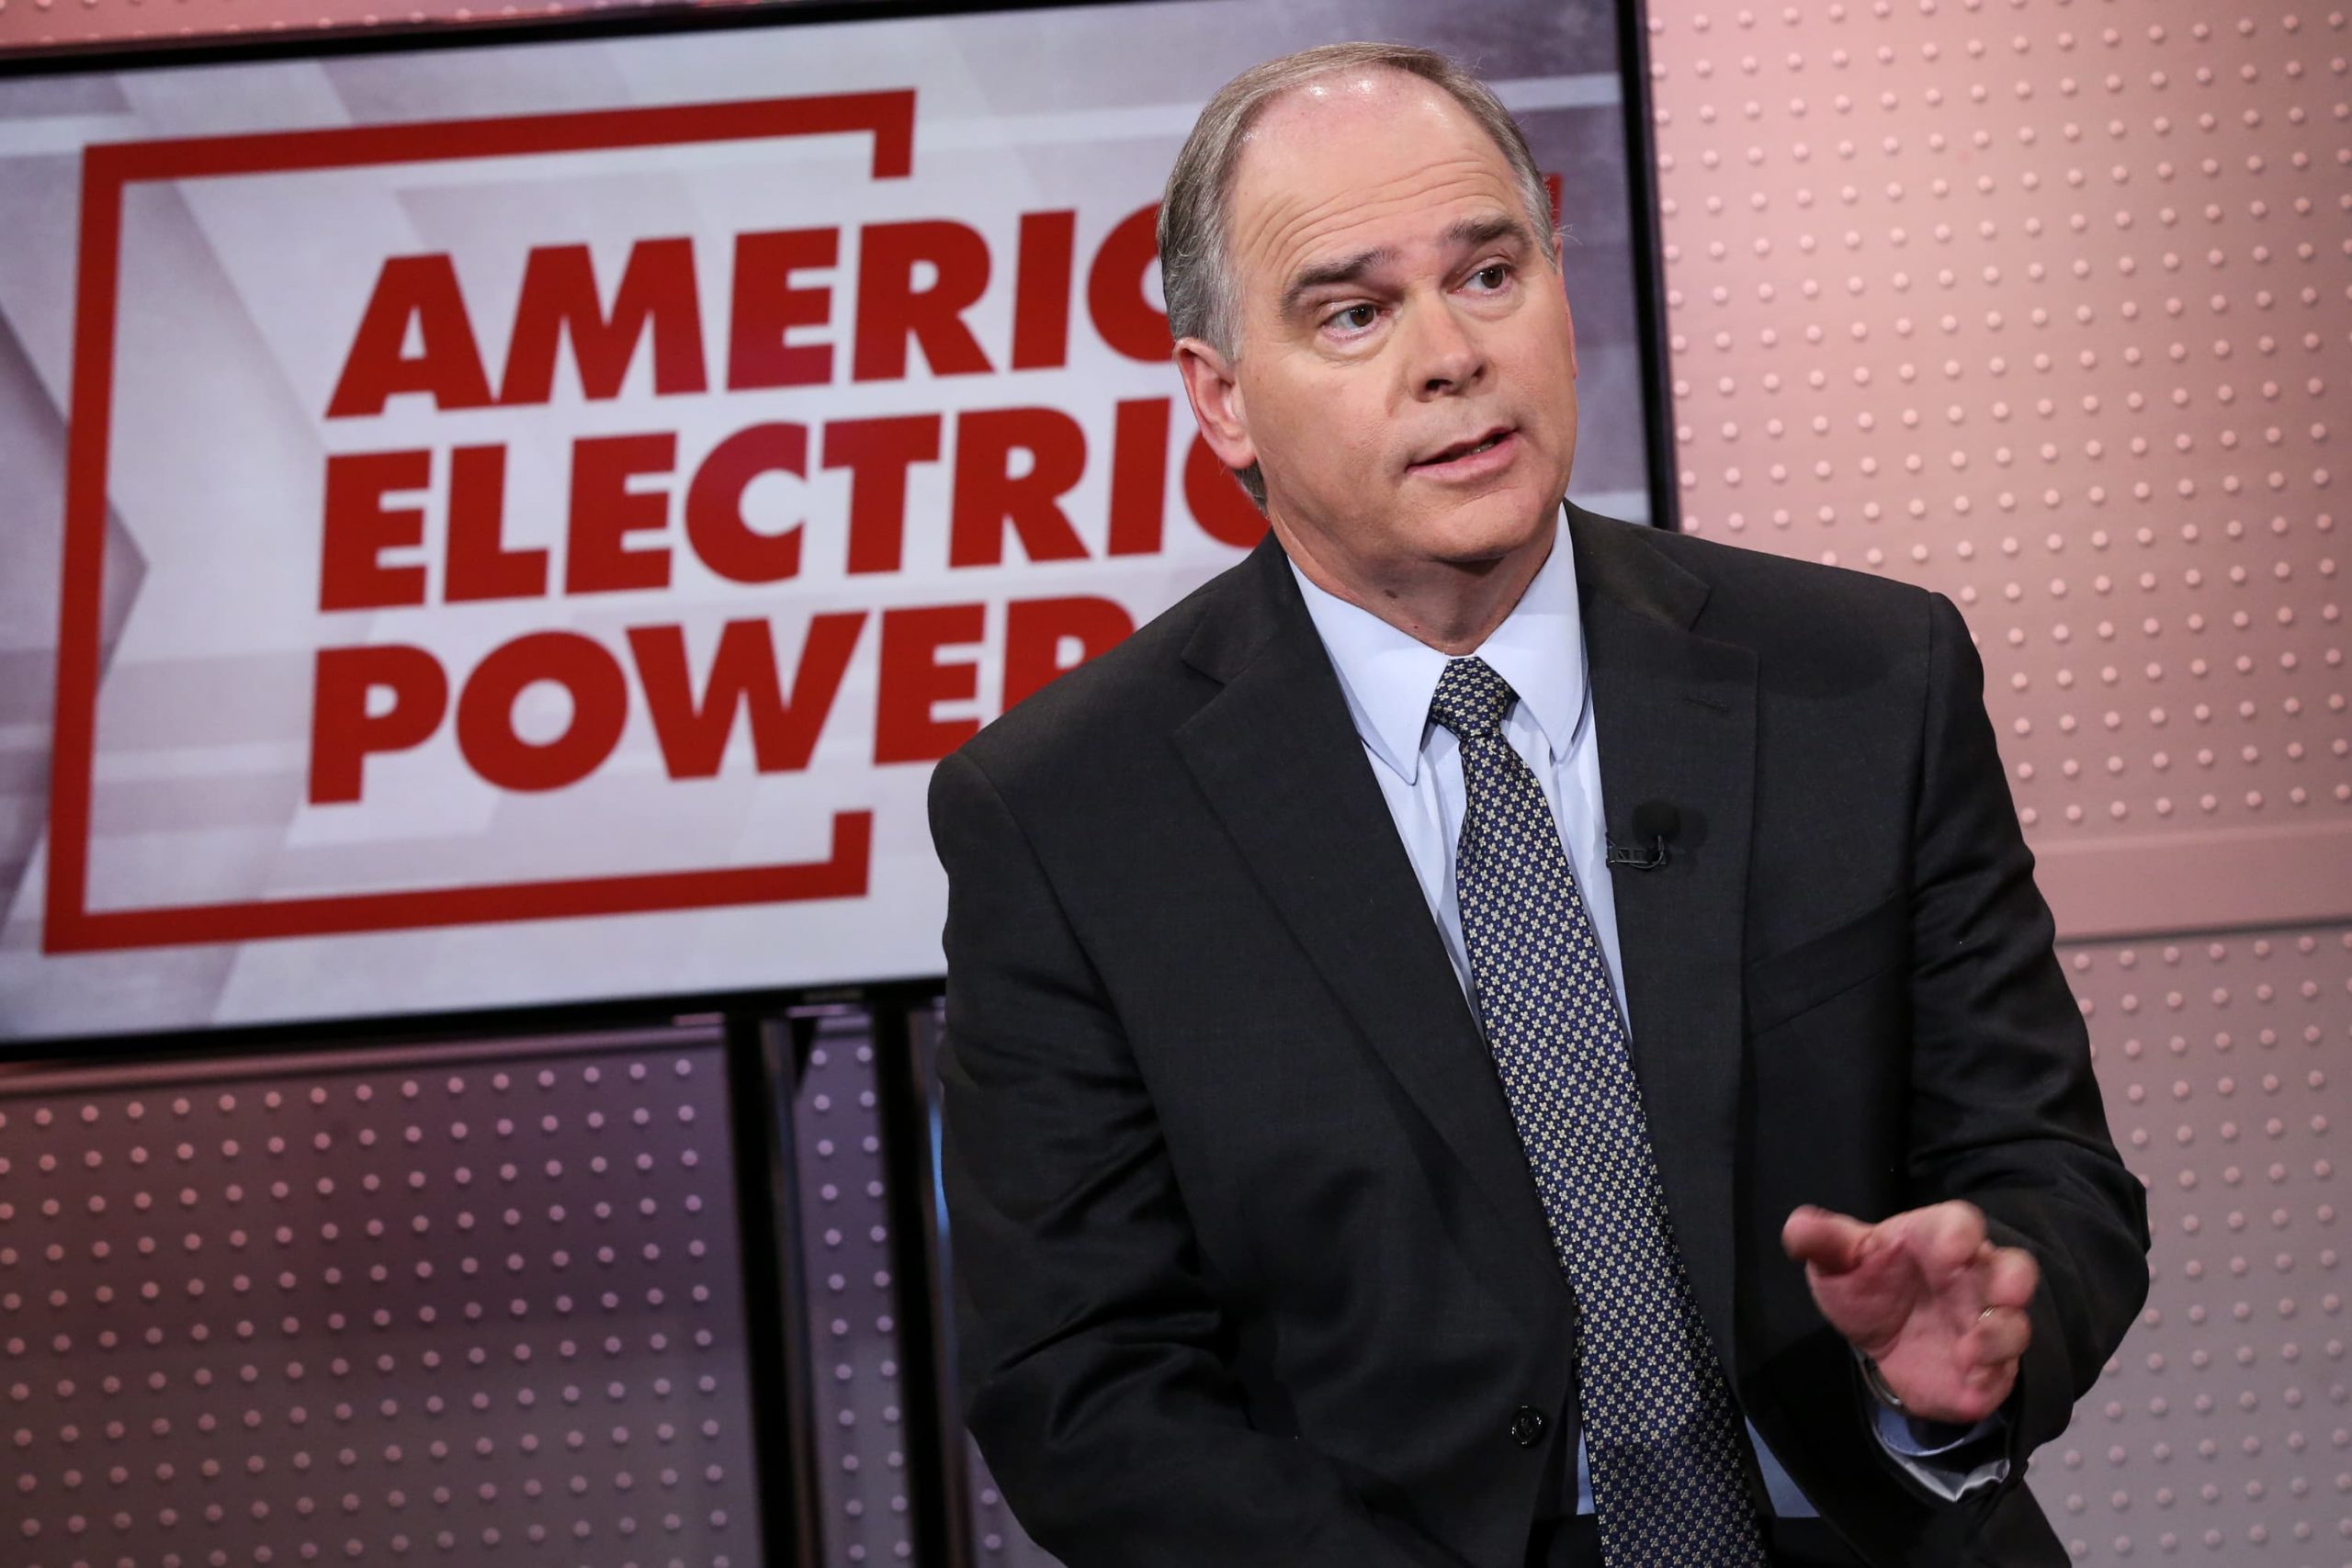 American Electric Power CEO says it’s focused on cybersecurity defense for years